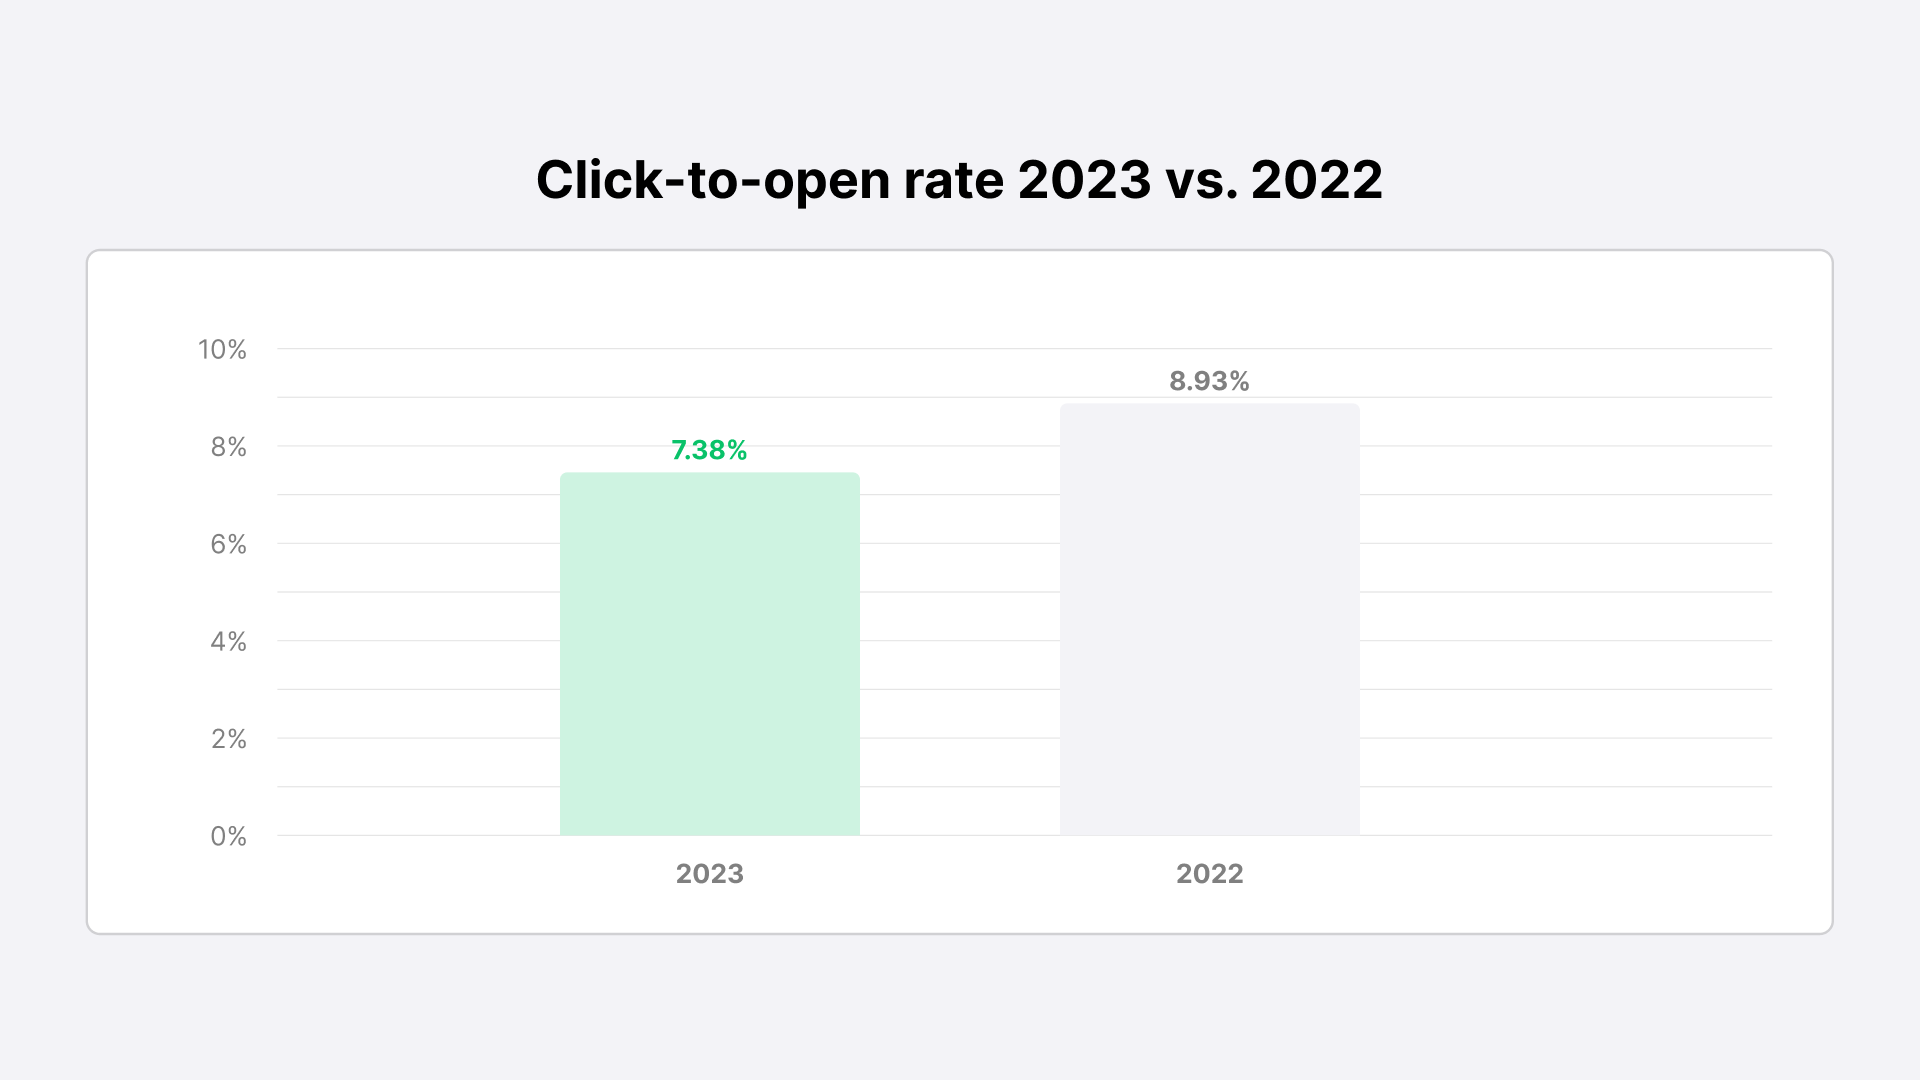 Email click-to-open rate 2022 vs 2023